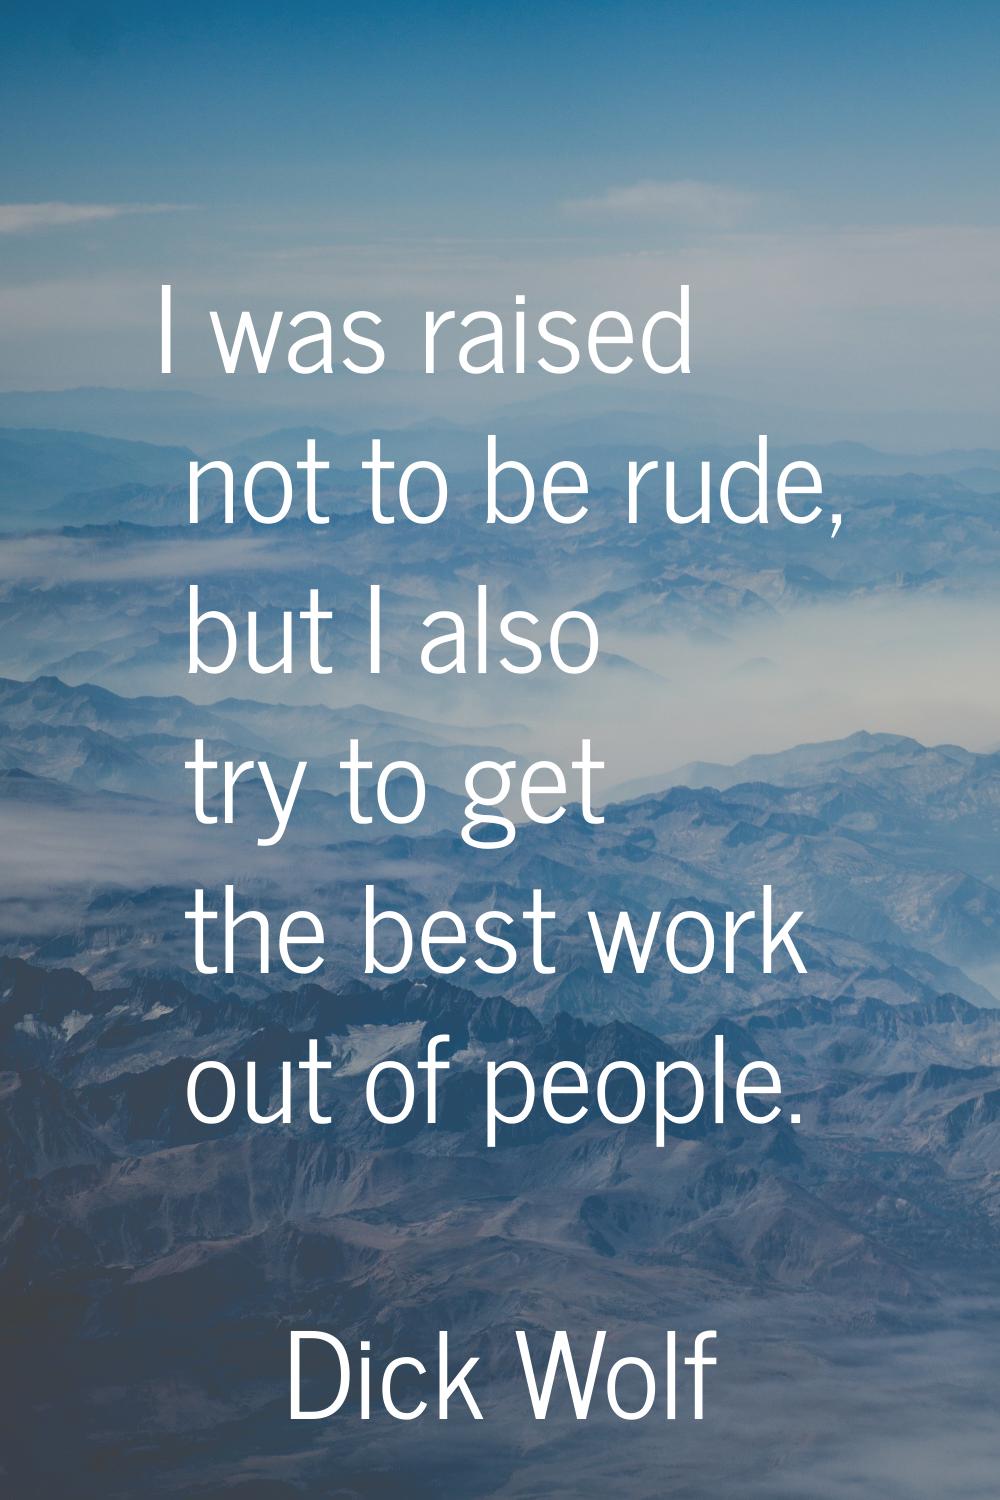 I was raised not to be rude, but I also try to get the best work out of people.